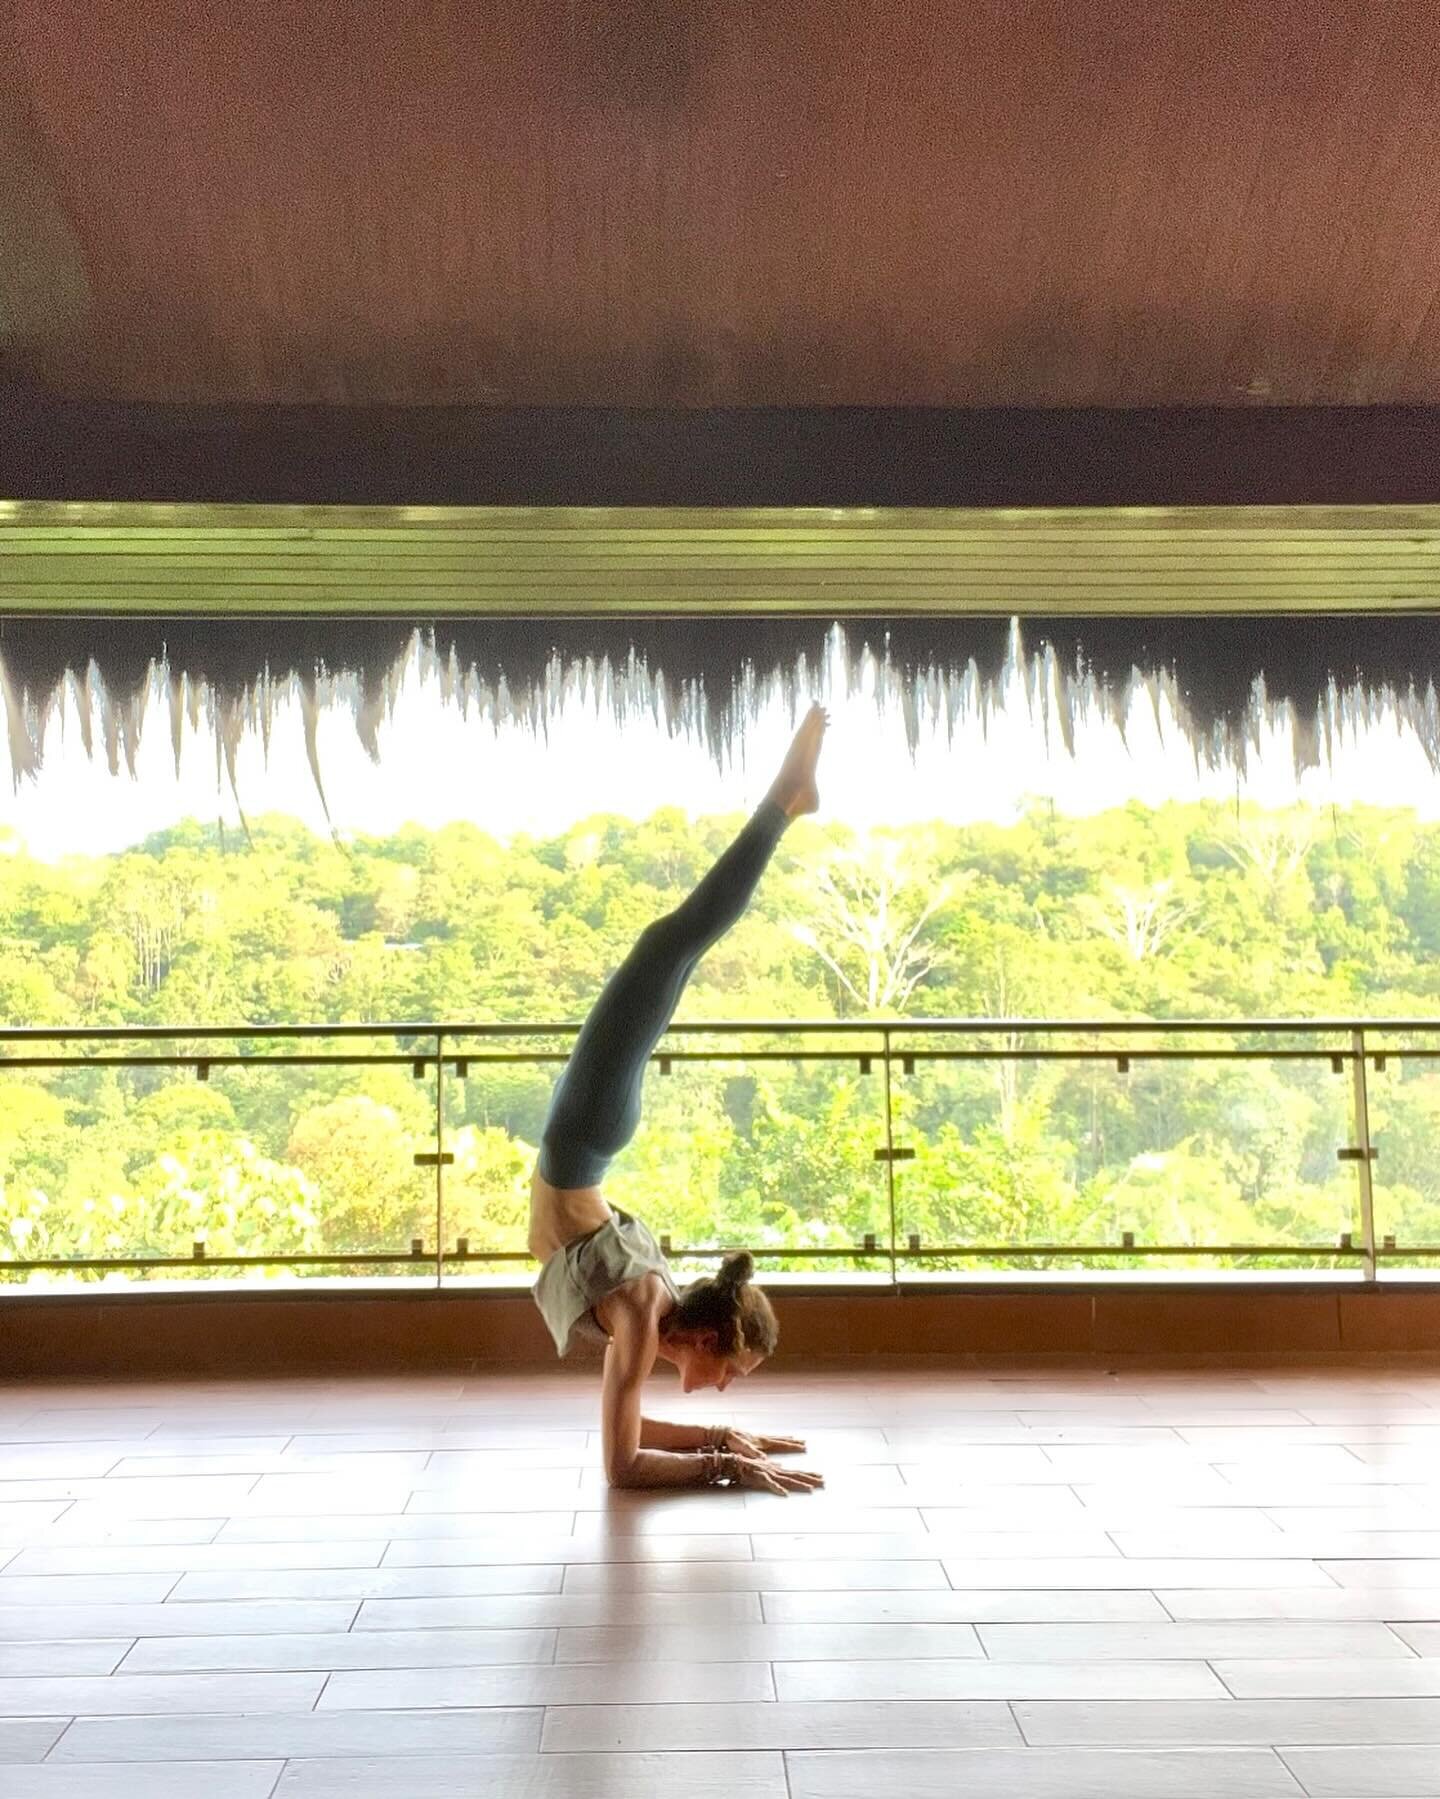 Beyond thankful @bos_uk for having me &amp; everyone that joined me on this incredible experience of a lifetime practicing yoga on &amp; off the mat. 

Fully charged &amp; inspired for our Colombia Retreat next month!

#borneo #animalsanctuary #rescu